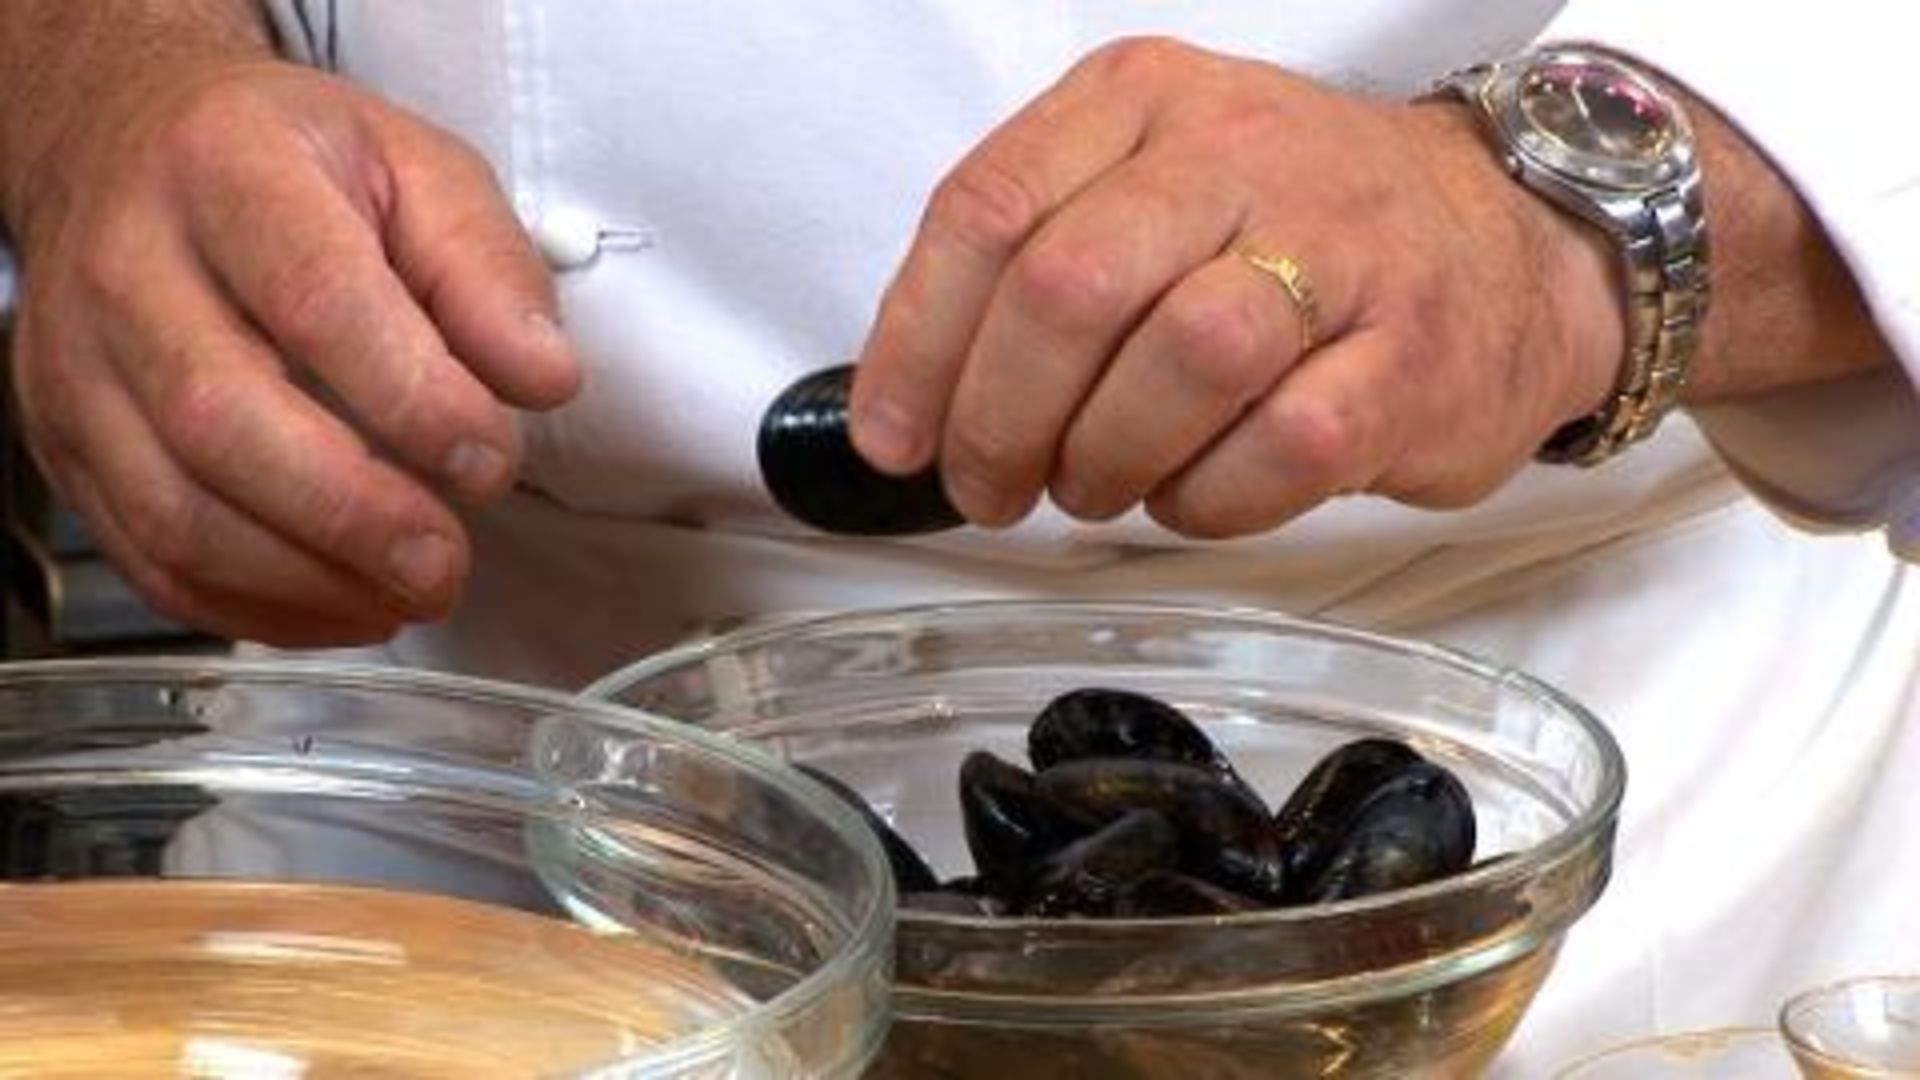 Mussels disappearing from New England waters, scientists say | wtsp.com